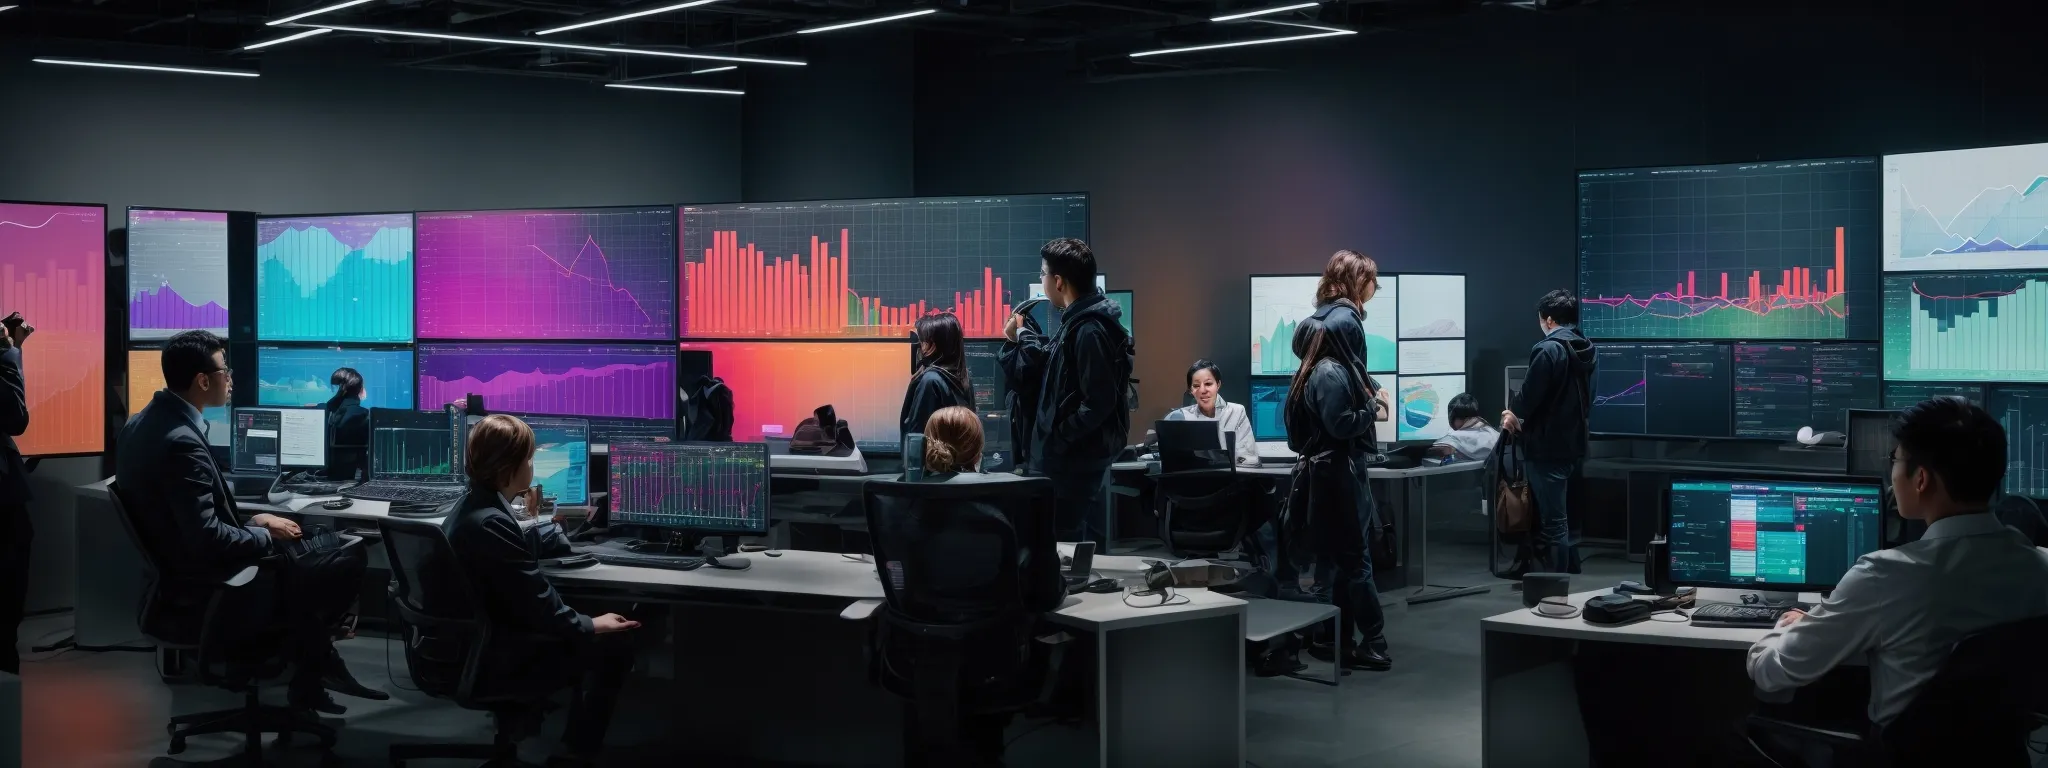 a group of marketers gather around a large computer monitor displaying colorful trend graphs and data analytics.